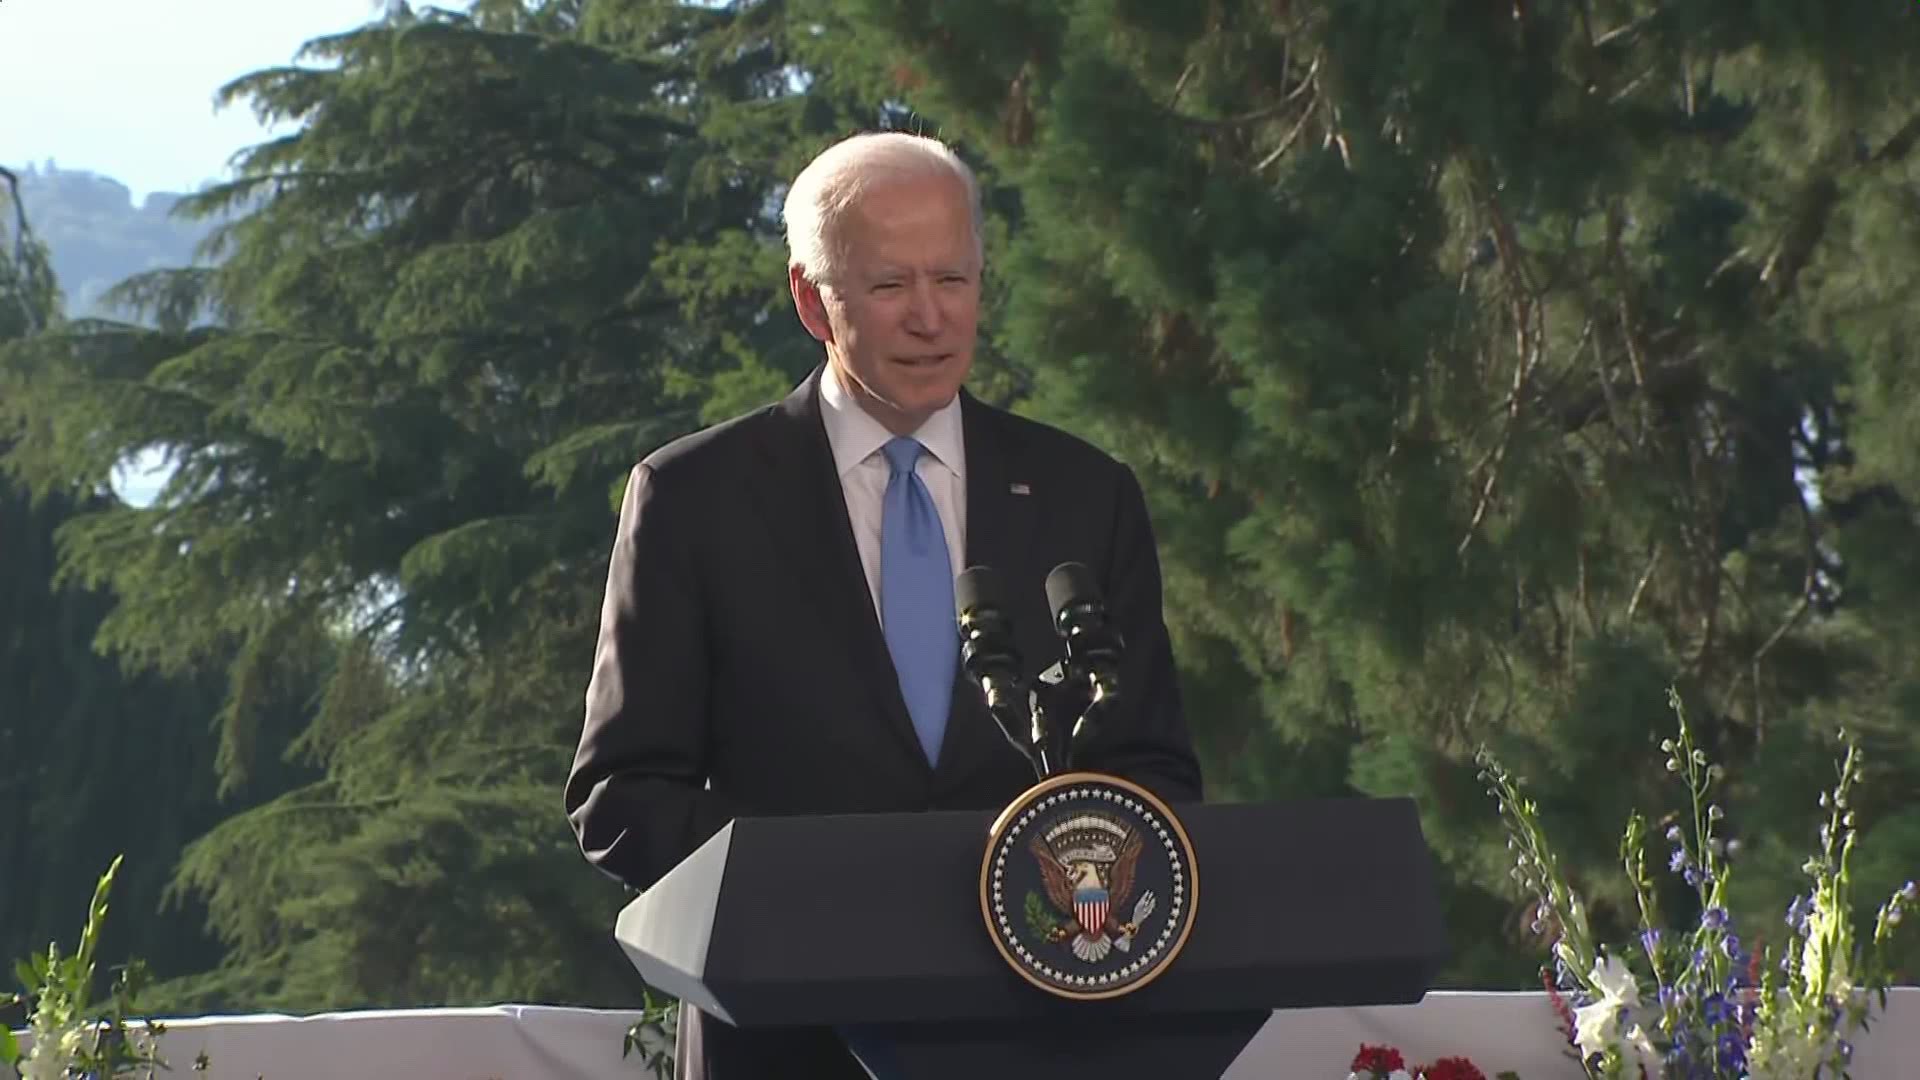 President Joe Biden responds to questions about Russian election interference and Alexei Navalny in prison, after summit with Russian President Vladimir Putin